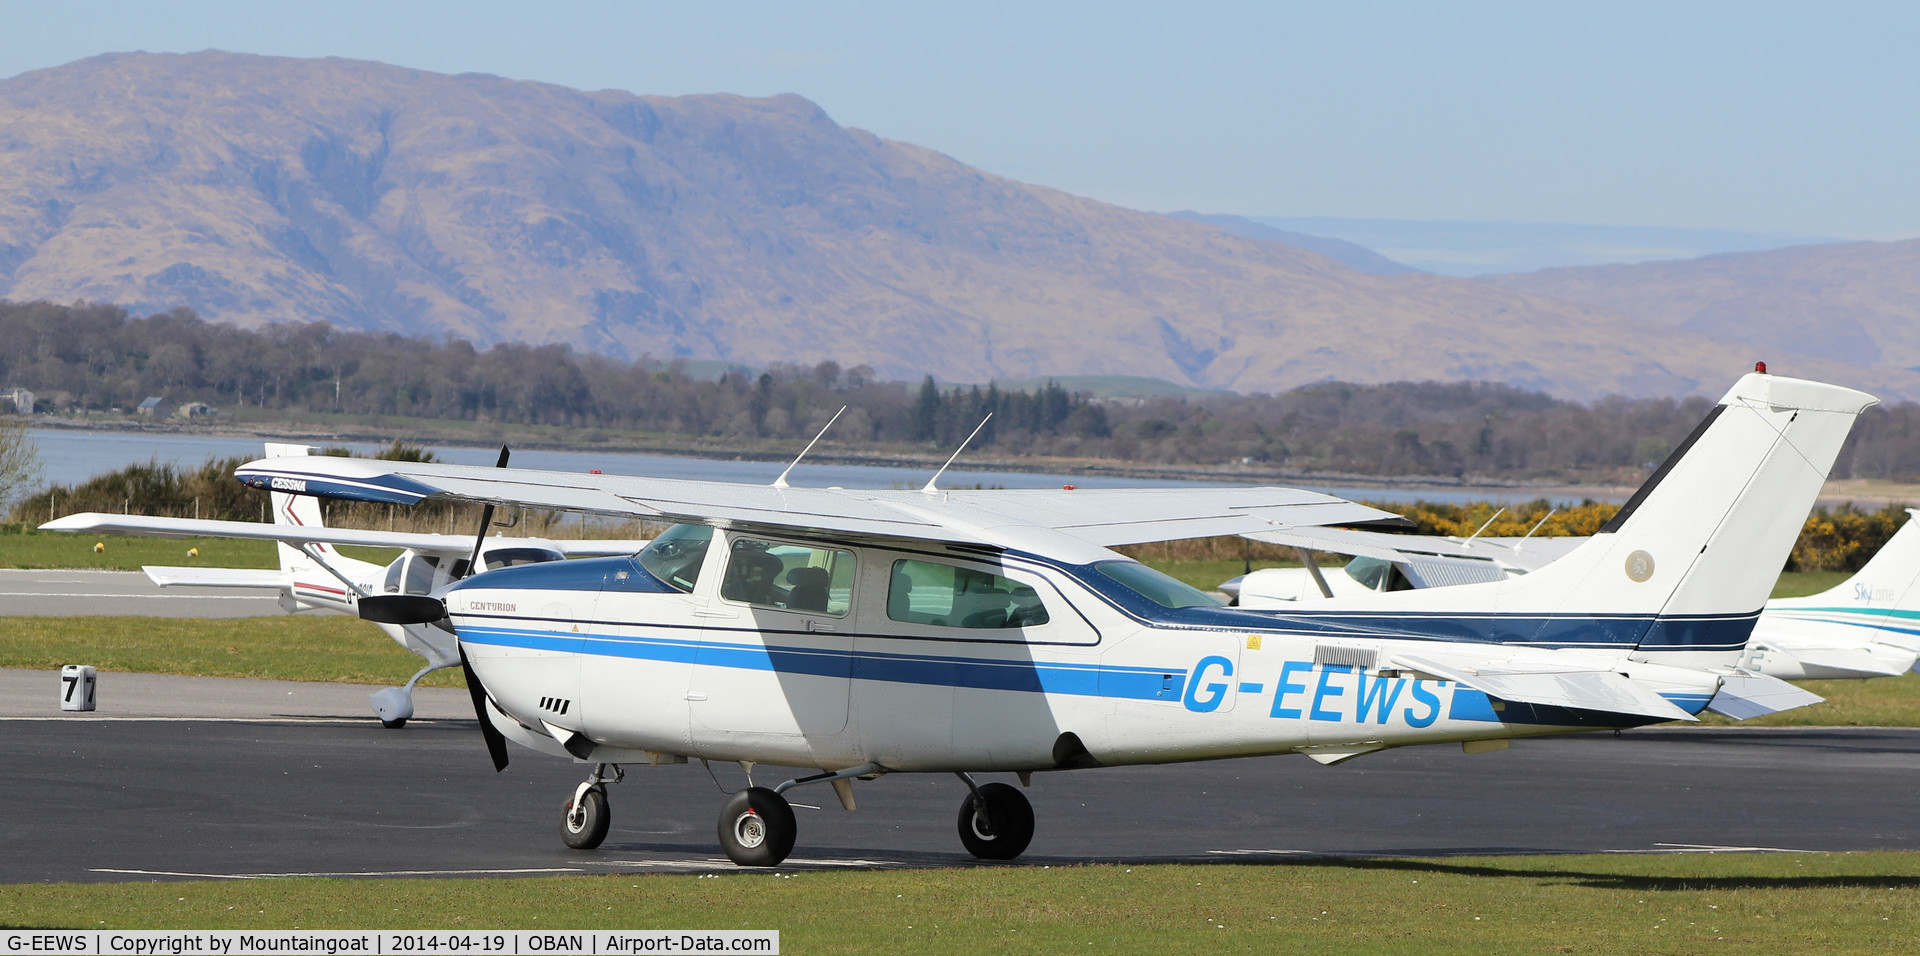 G-EEWS, 1981 Cessna T210N Turbo Centurion C/N 210-64341, At the hard stand during a busy day at Oban